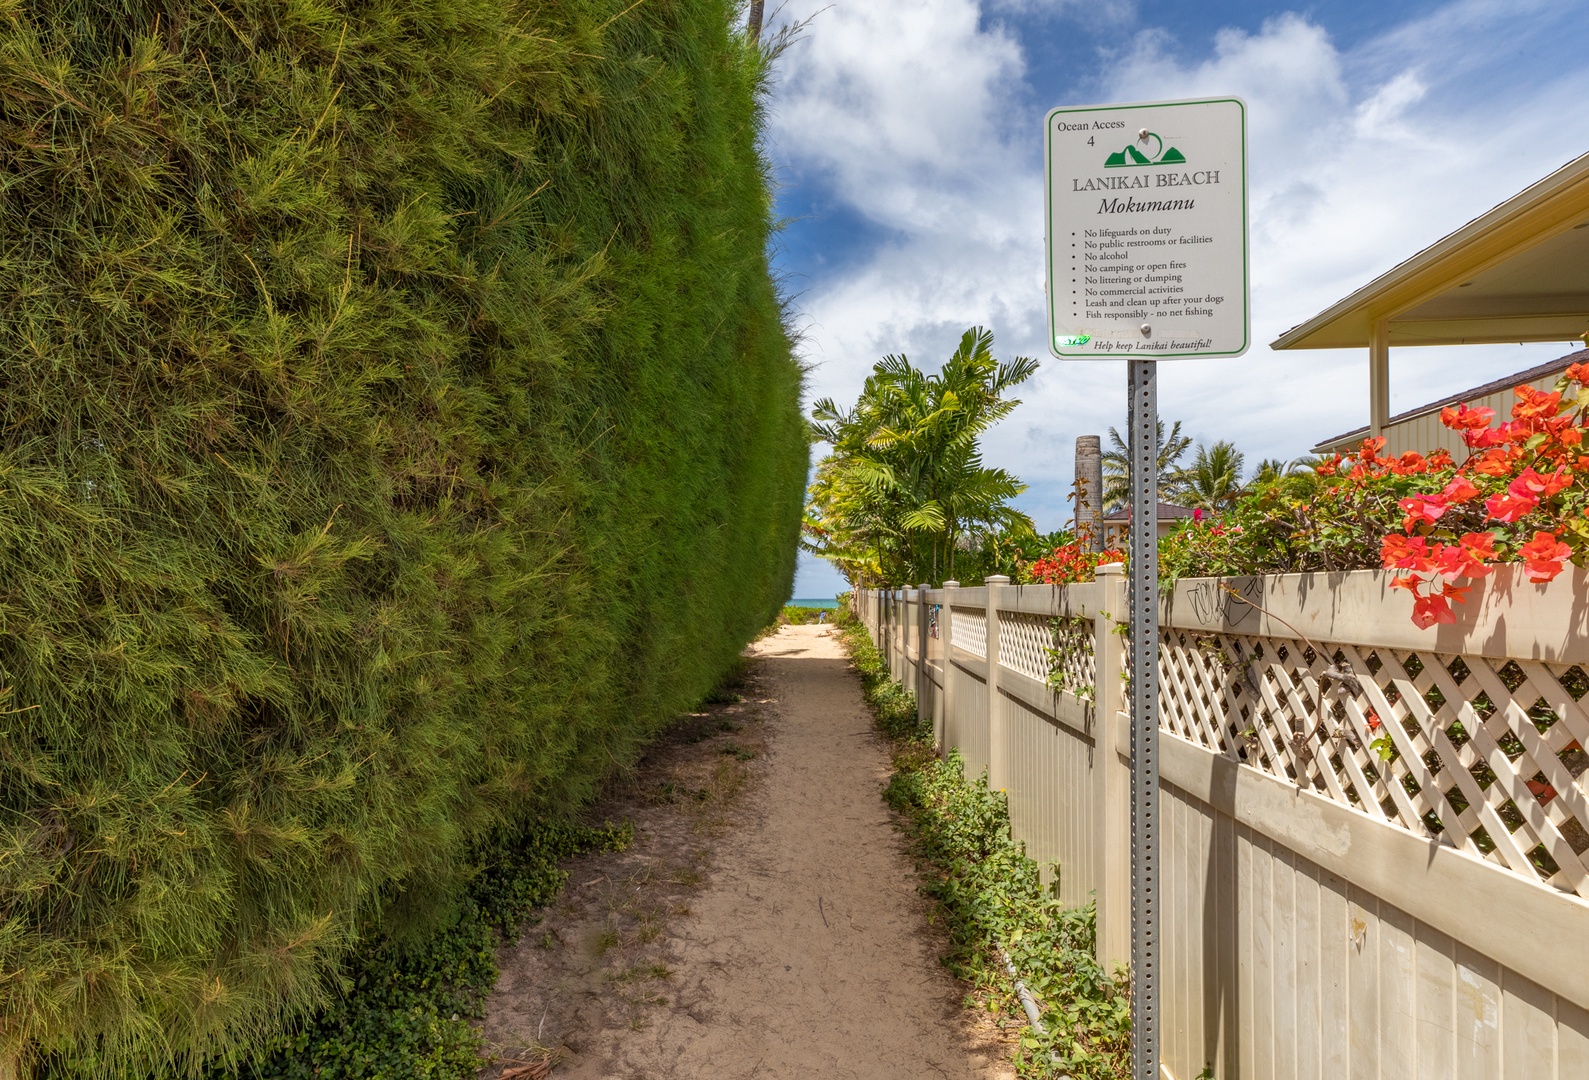 Kailua Vacation Rentals, Lanikai Breeze - Public Beach Access a few steps away from the home